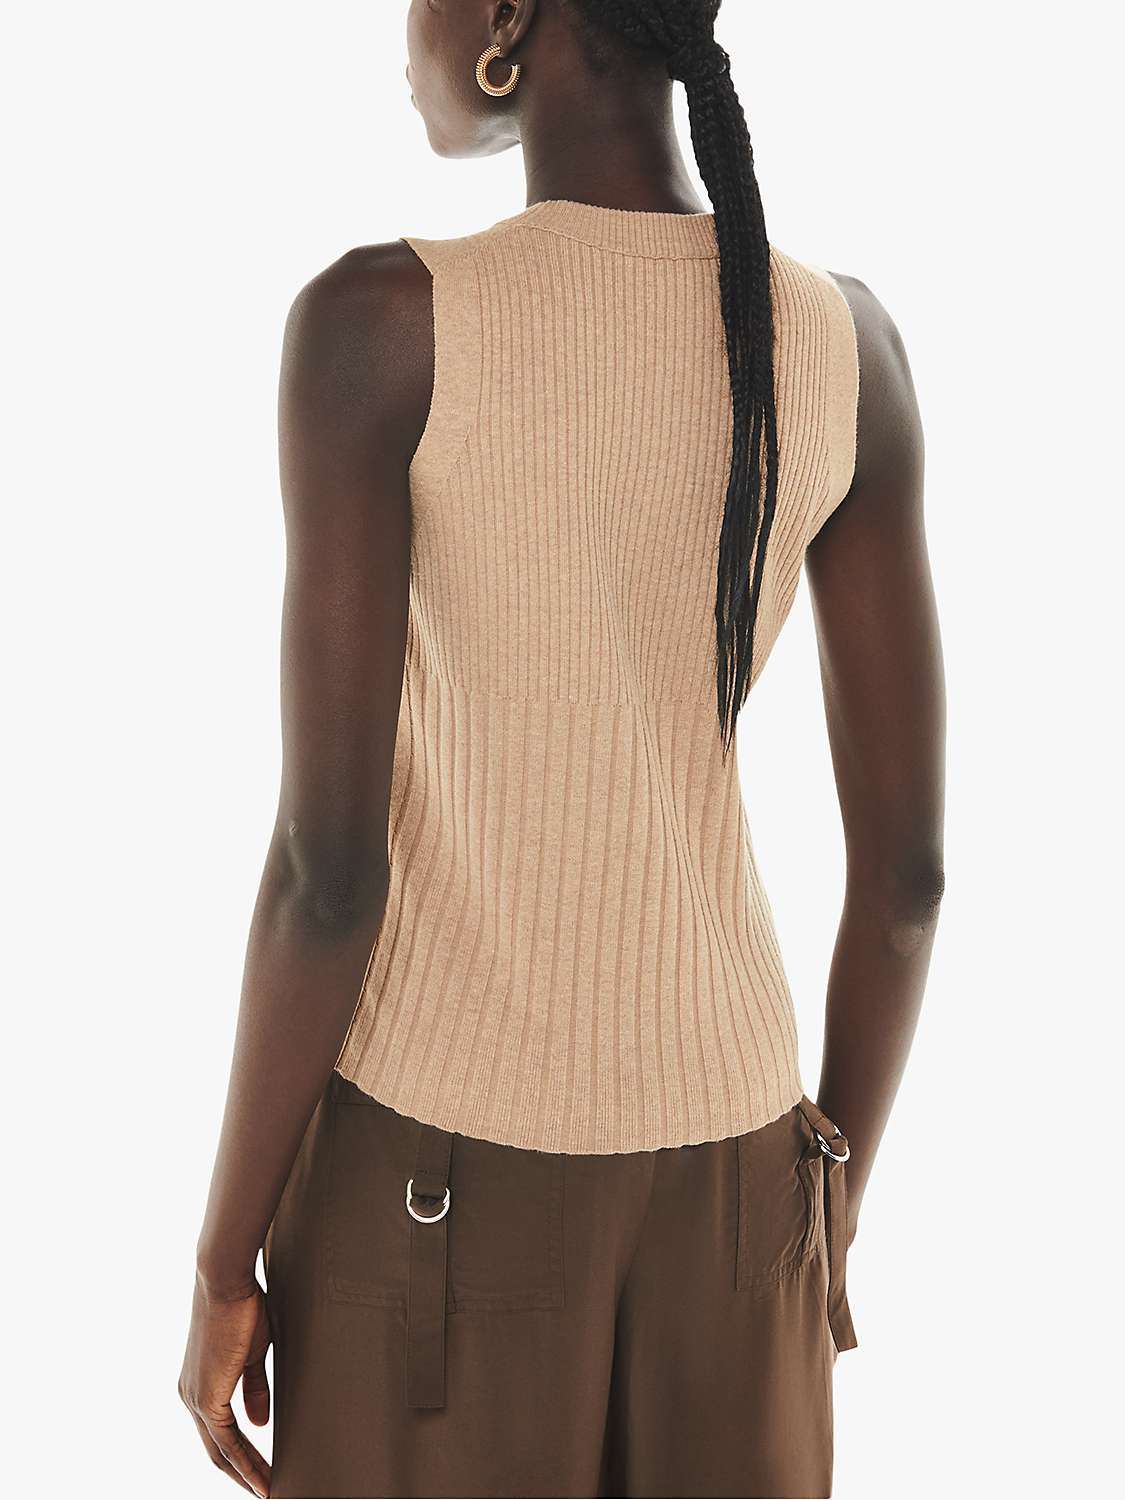 Buy Whistles Sleeveless Ribbed Tank Top Online at johnlewis.com